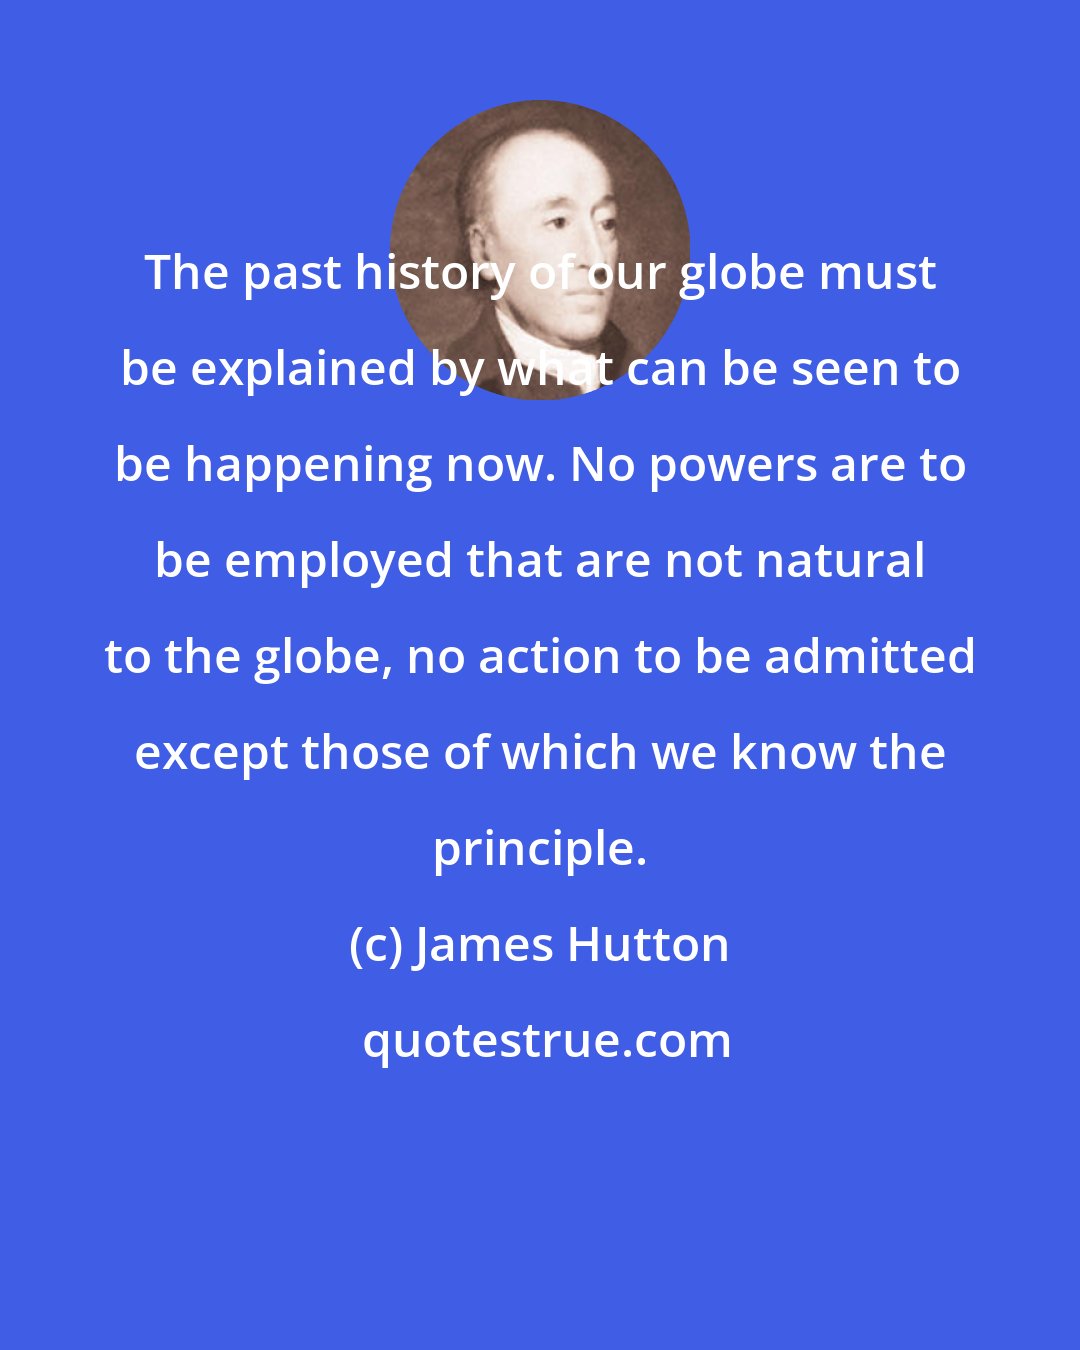 James Hutton: The past history of our globe must be explained by what can be seen to be happening now. No powers are to be employed that are not natural to the globe, no action to be admitted except those of which we know the principle.